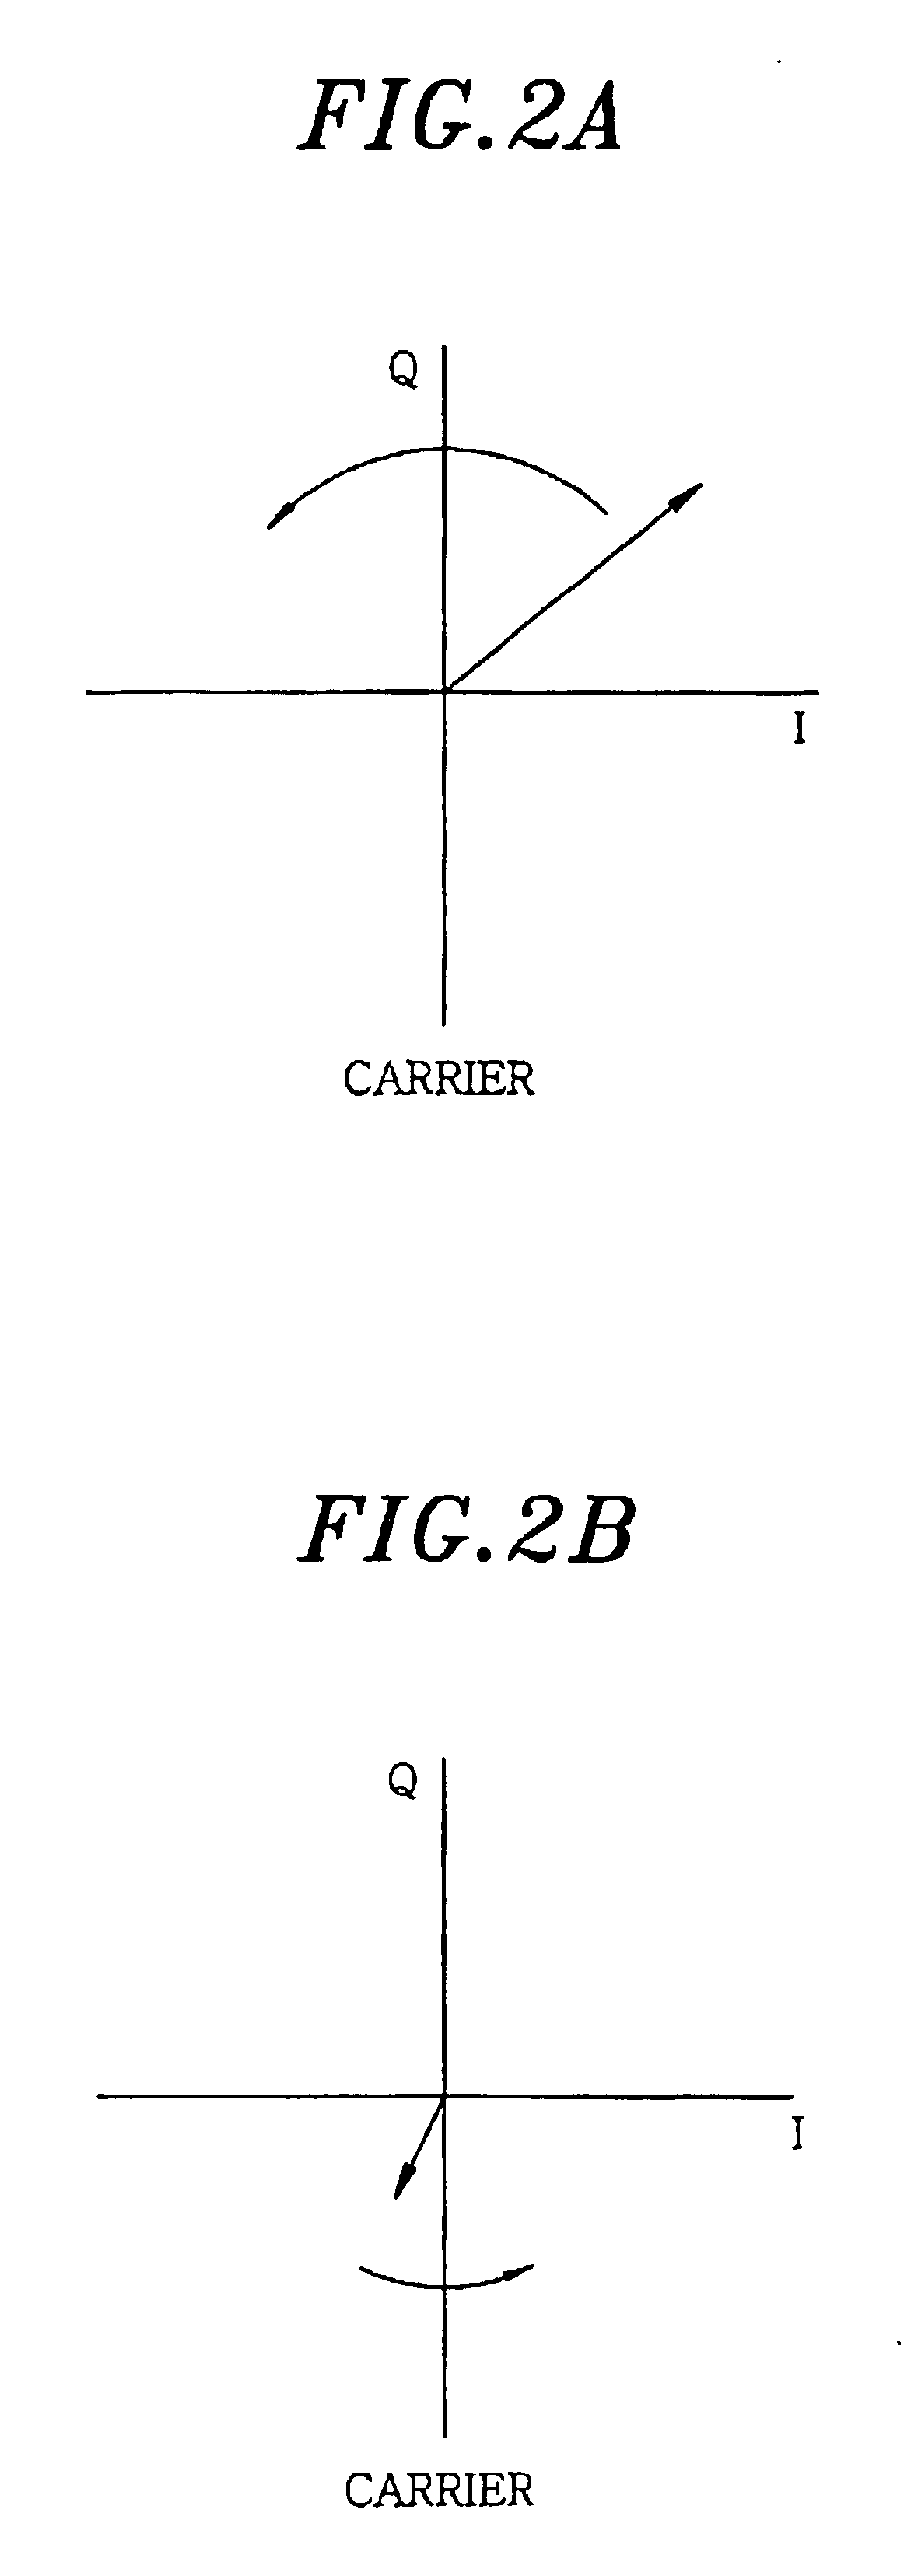 Peak limiter and multi-carrier amplification apparatus